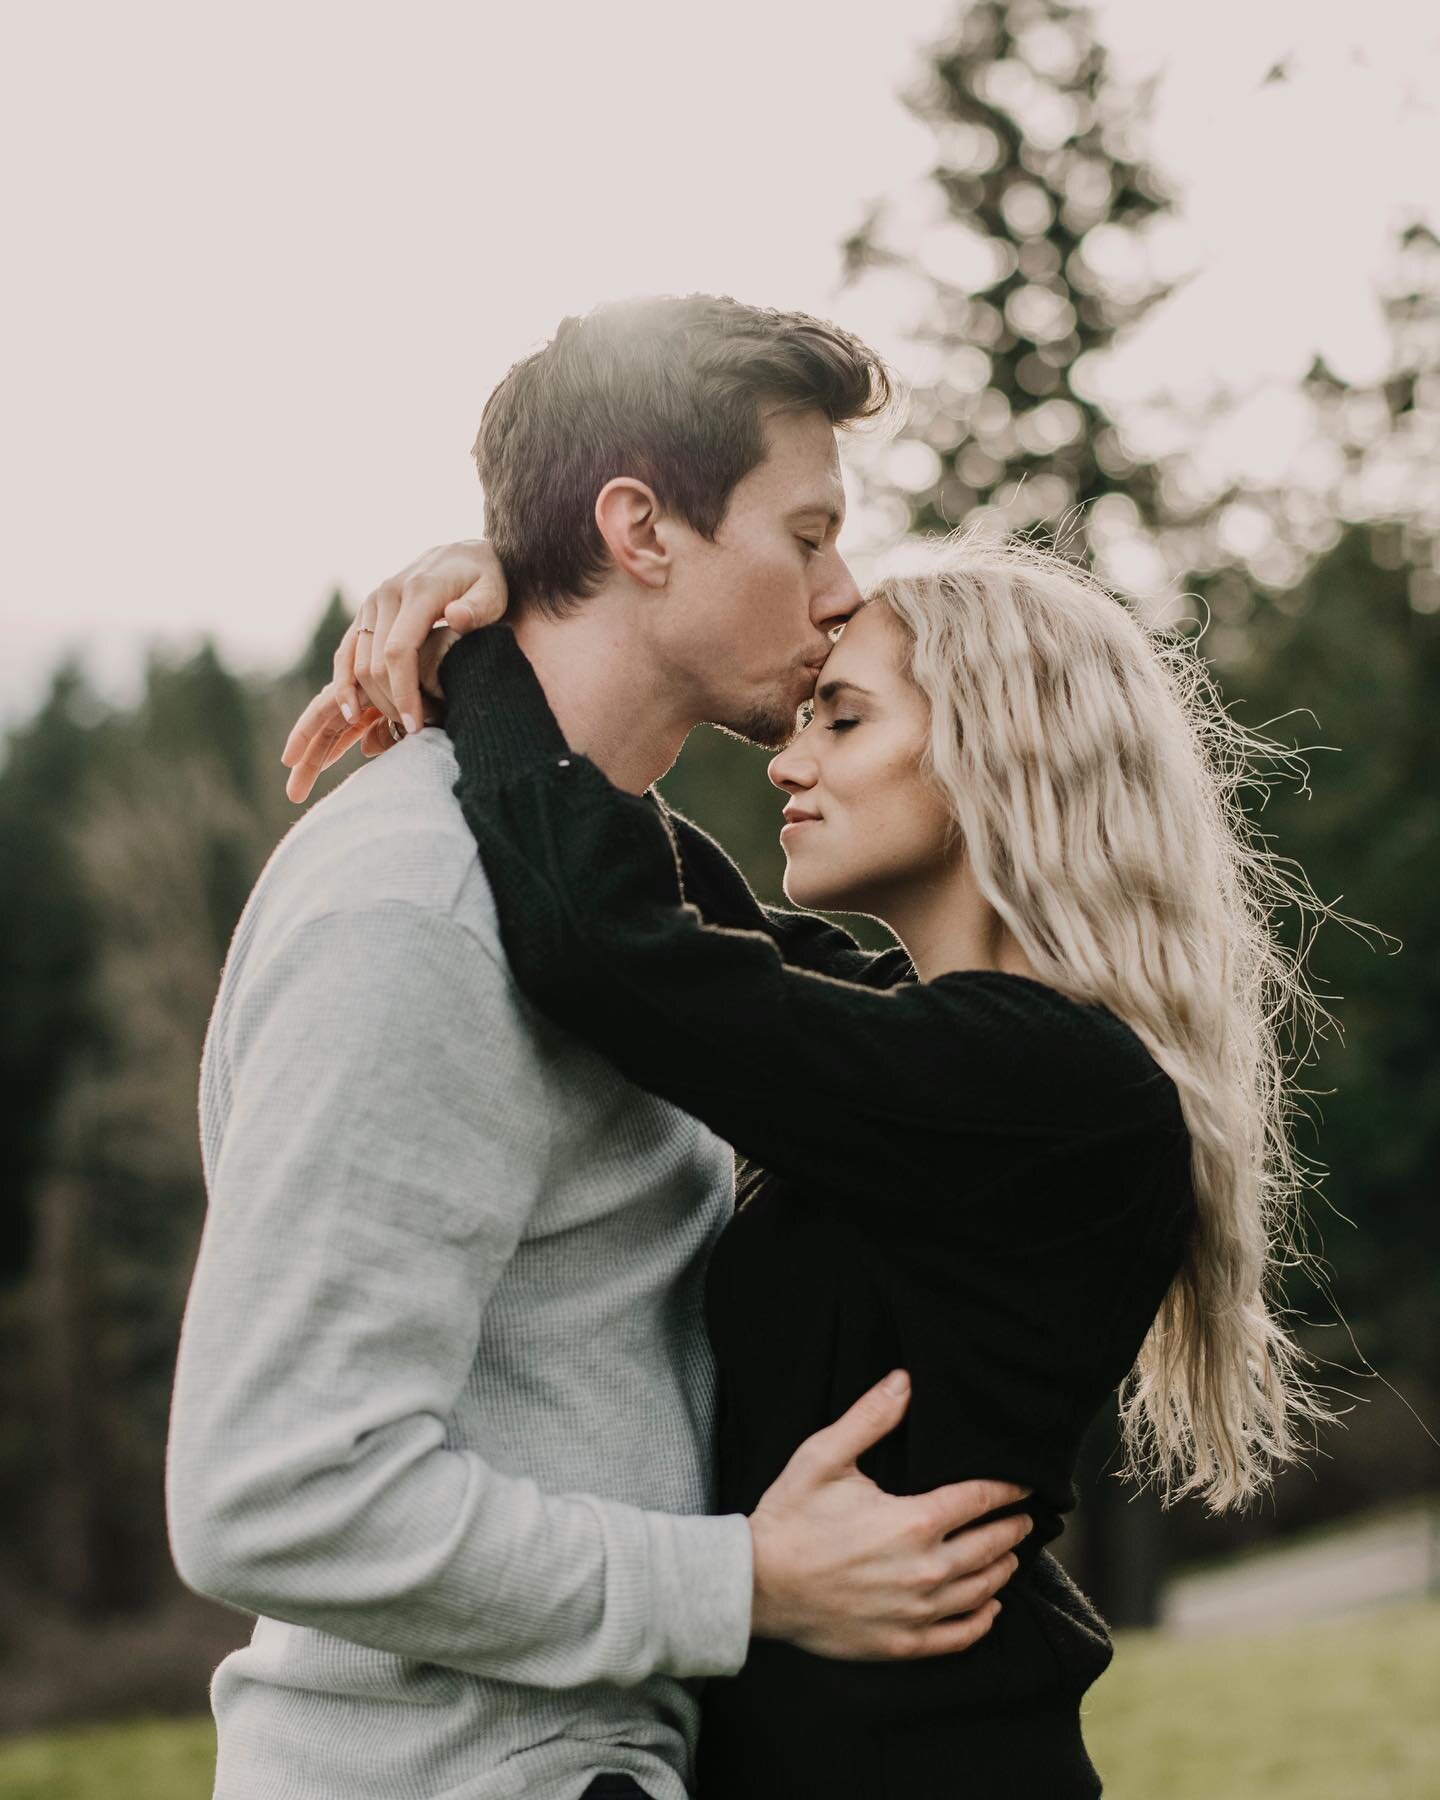 Dreamy Engagement Session at Hoyt Arboretum in Portland, Oregon. 
:
One of my favorite parts about traveling for photography is meeting new couples and seeing new places I&rsquo;ve never been before. It was lovely to wander around Hoyt Arboretum with